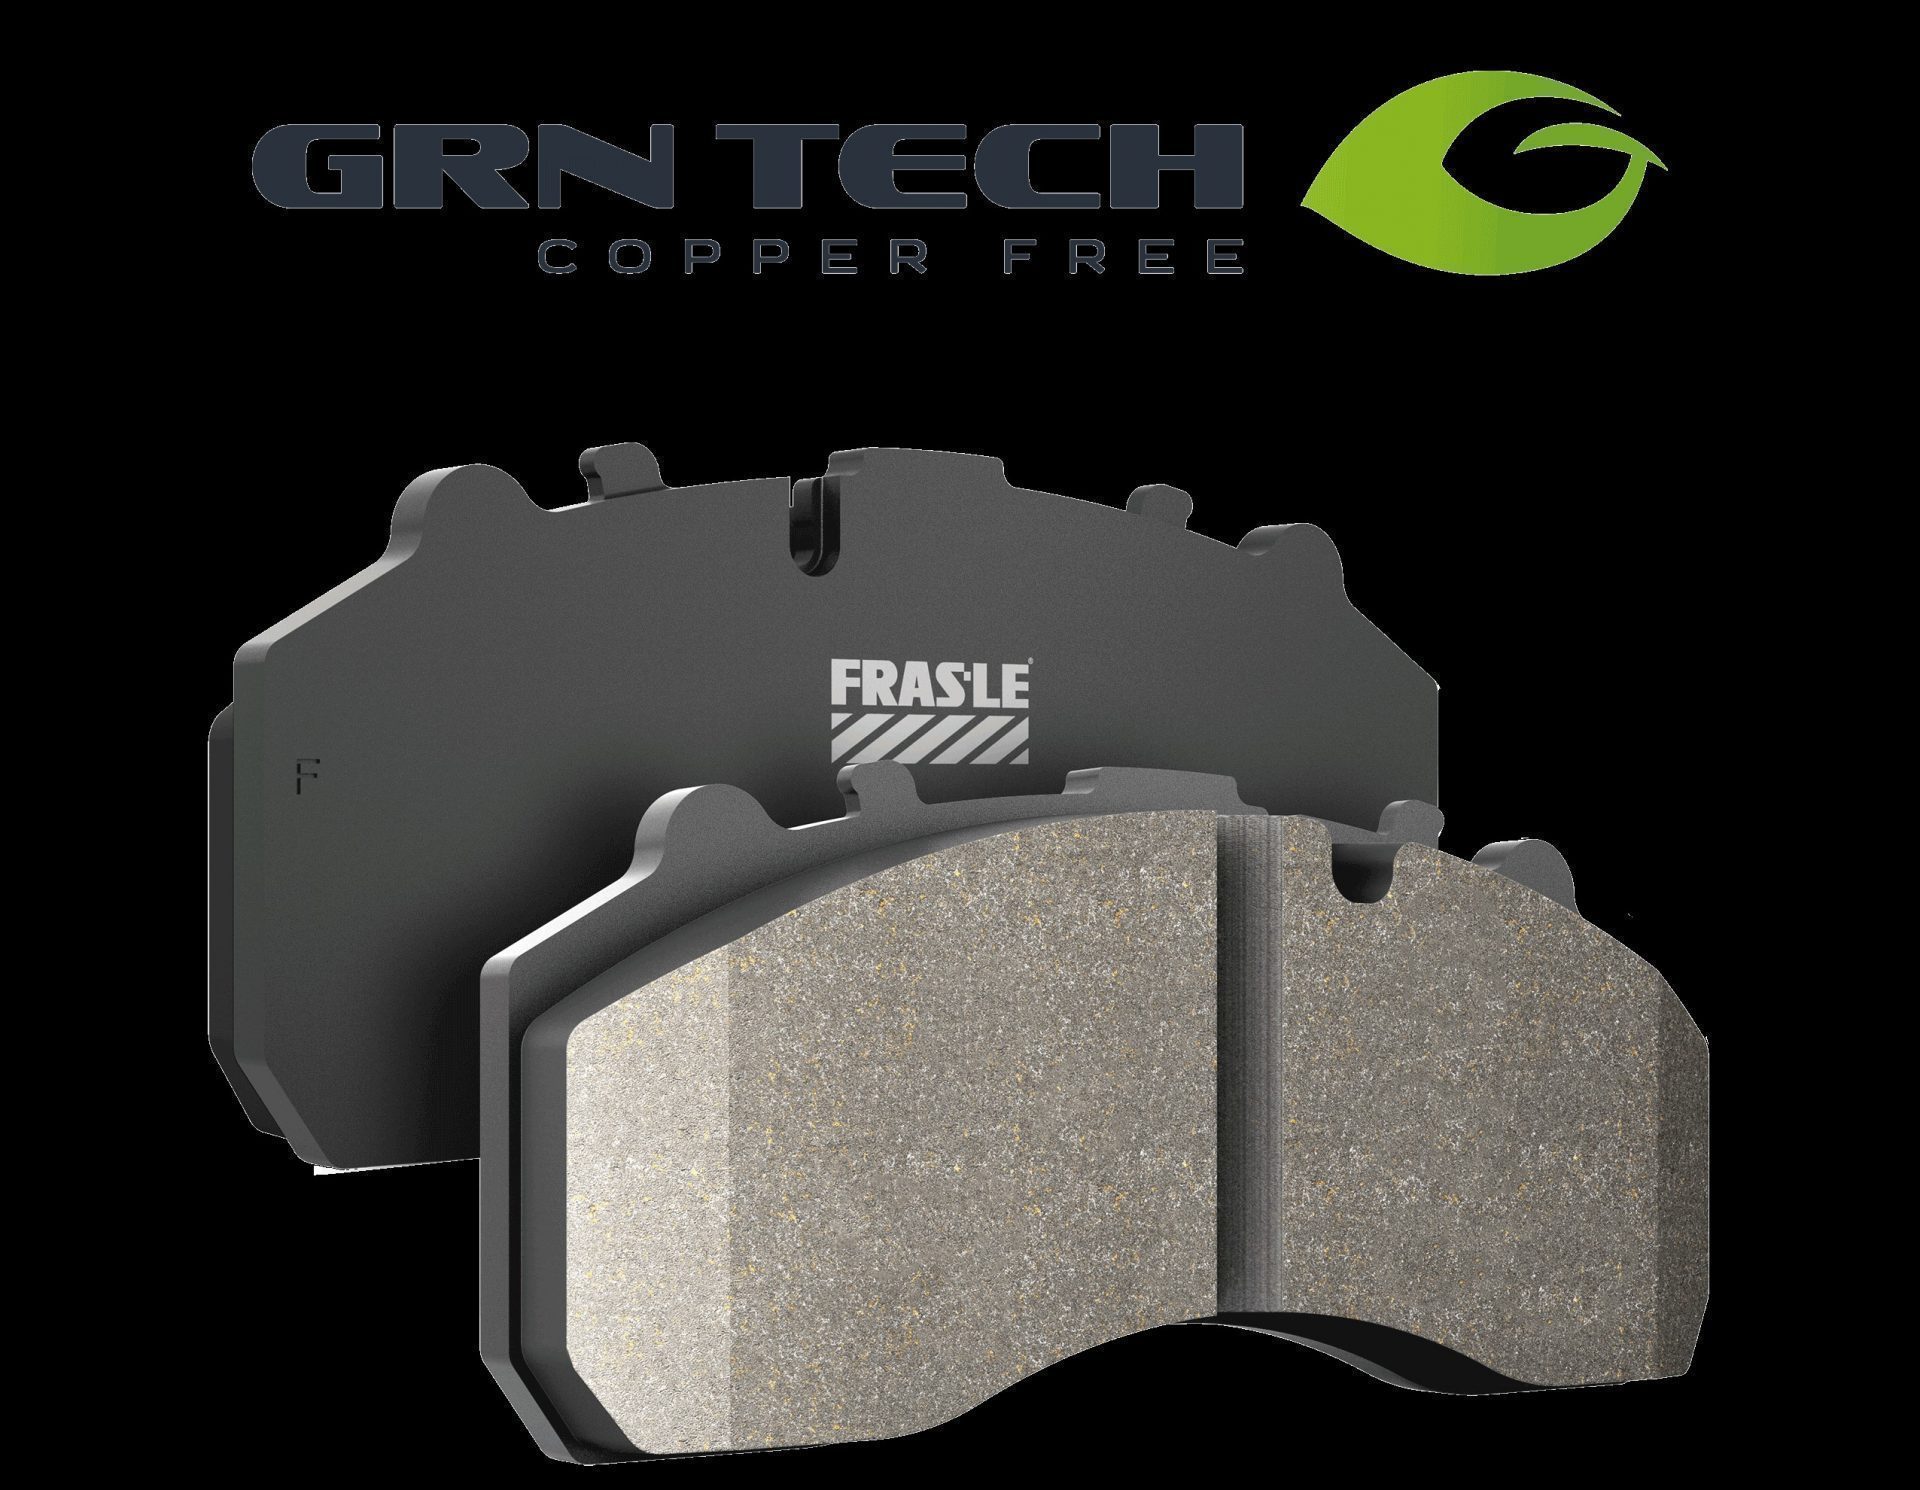 Fras-Le's new GRN Tech copper-free brake pads and discs